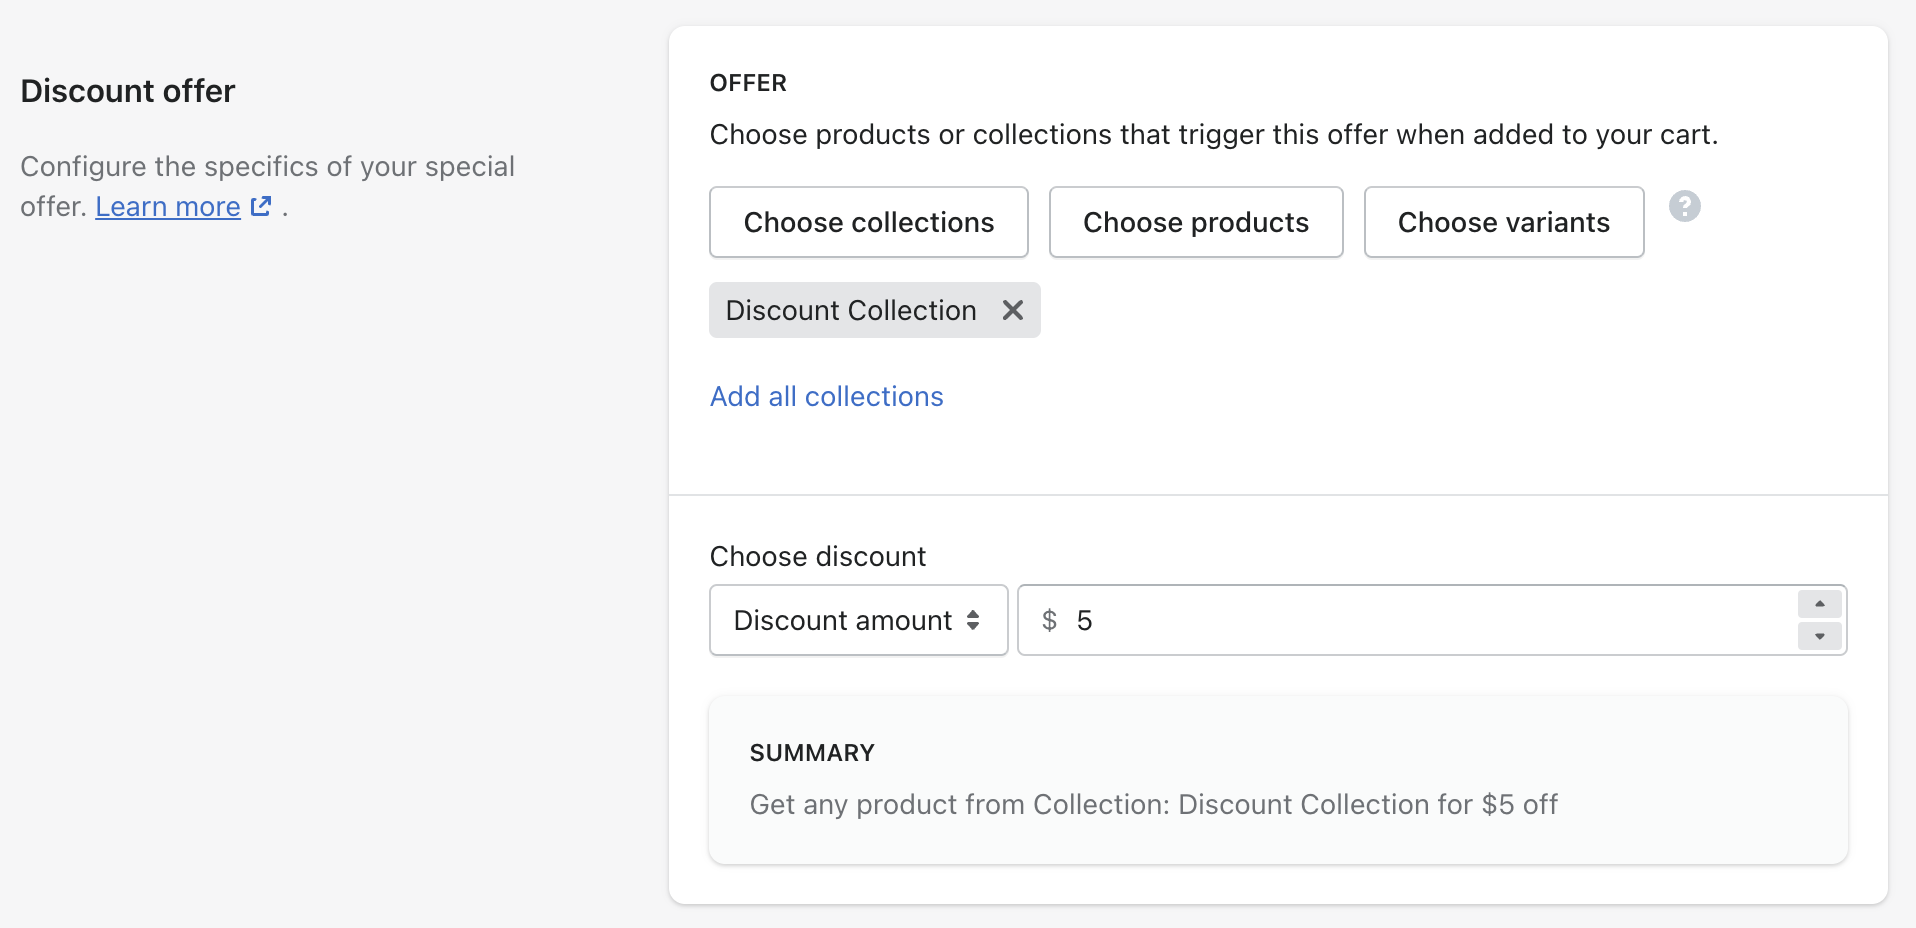 Settings to target items and set a discount level for a Discount offer.